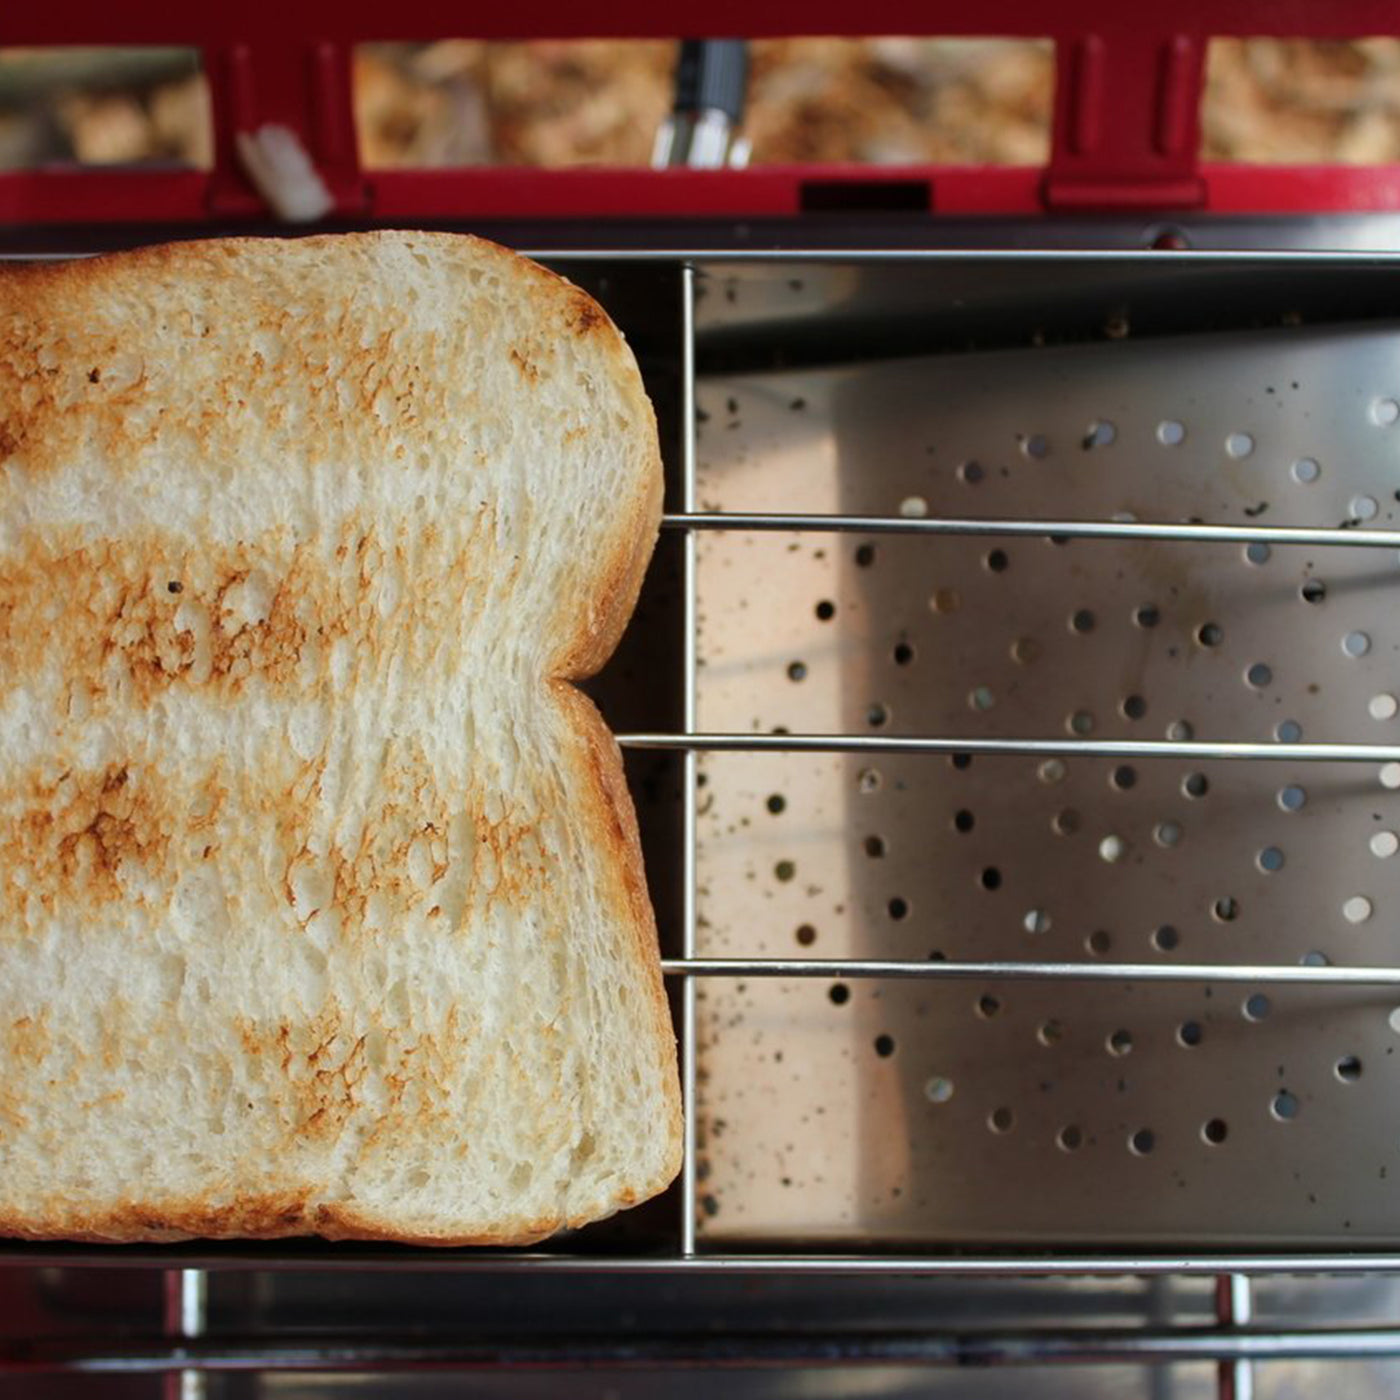 CAMP-A-TOASTER® Stainless Steel • Single item • Best 2 Slice Stove Top Toaster